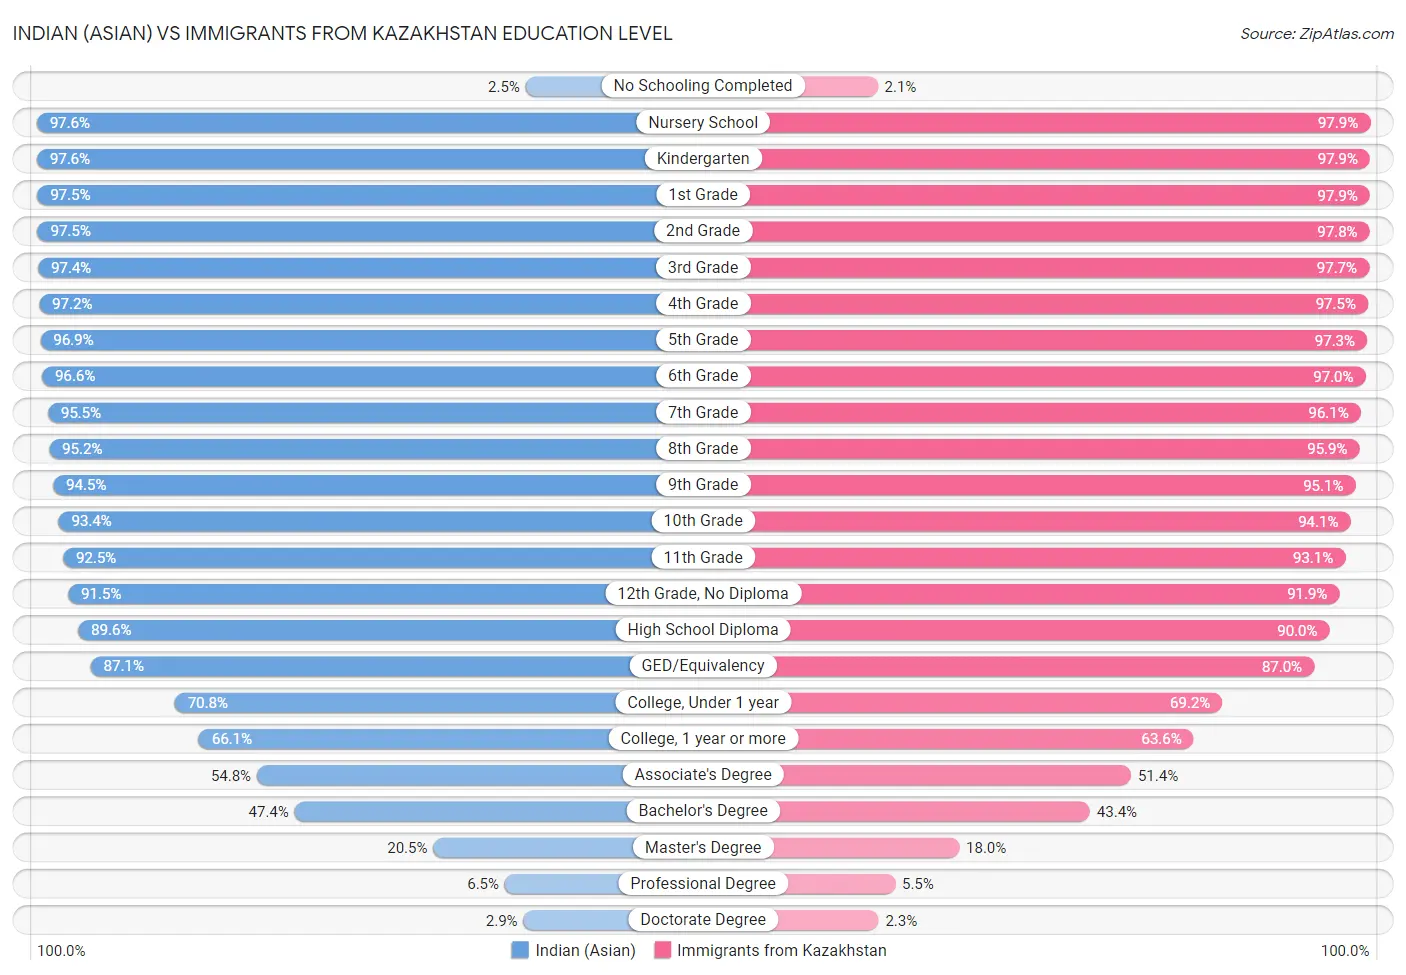 Indian (Asian) vs Immigrants from Kazakhstan Education Level